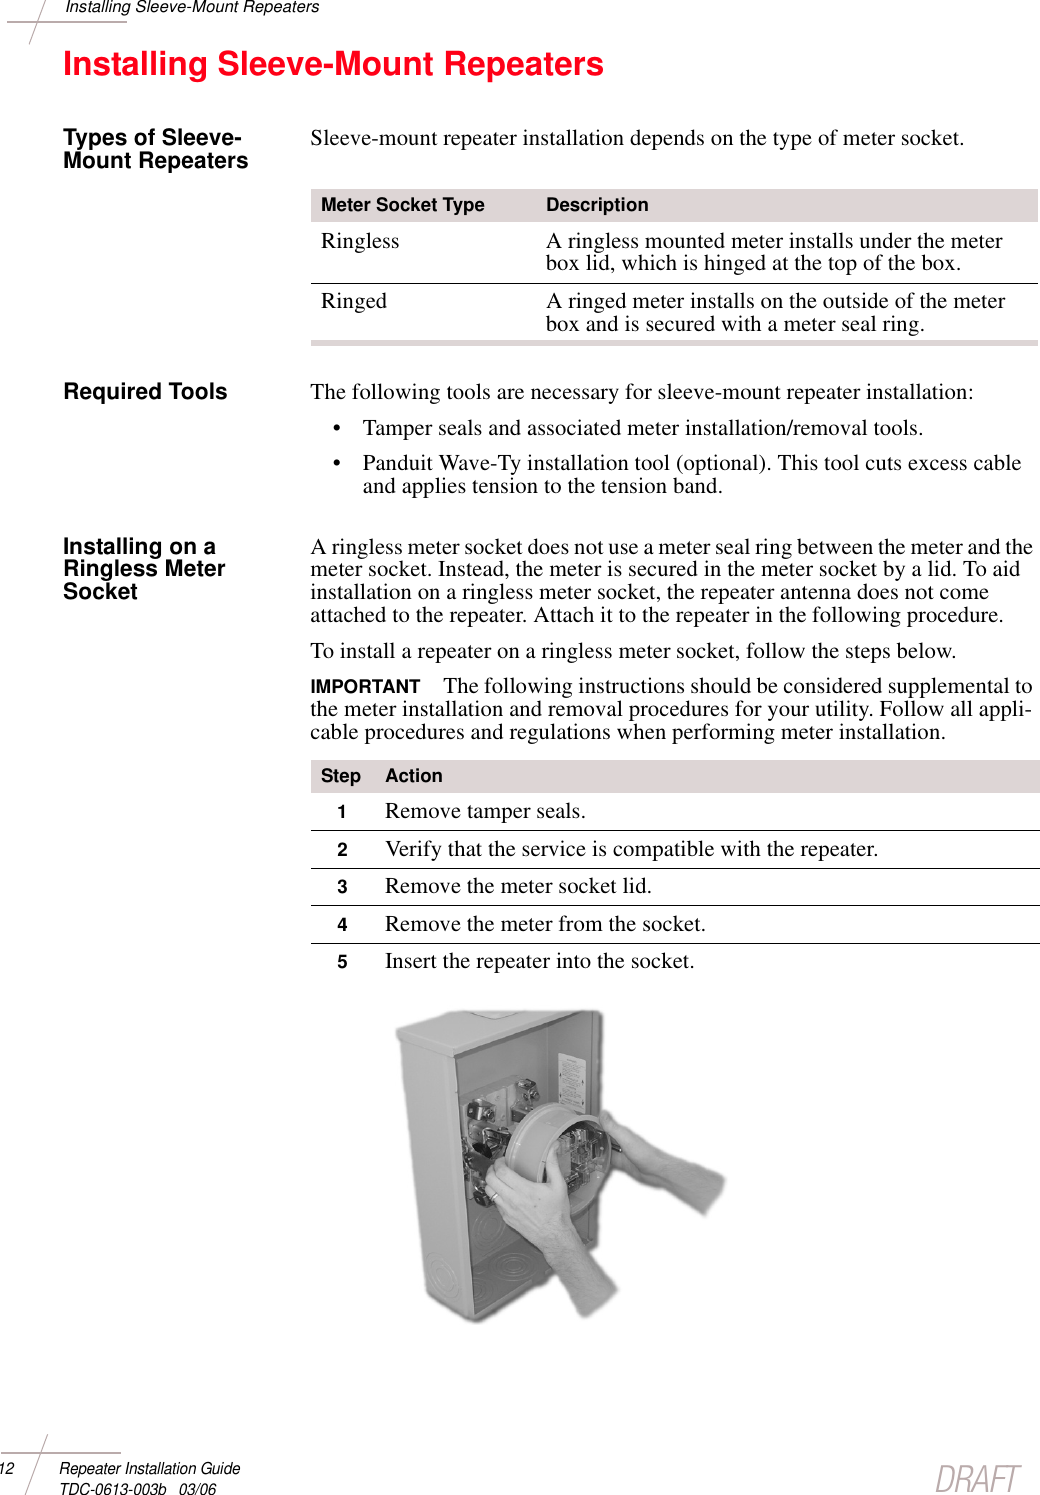 DRAFT12 Repeater Installation Guide TDC-0613-003b   03/06Installing Sleeve-Mount RepeatersInstalling Sleeve-Mount RepeatersTypes of Sleeve- Mount Repeaters Sleeve-mount repeater installation depends on the type of meter socket. Required Tools The following tools are necessary for sleeve-mount repeater installation:• Tamper seals and associated meter installation/removal tools.• Panduit Wave-Ty installation tool (optional). This tool cuts excess cable and applies tension to the tension band. Installing on a Ringless Meter SocketA ringless meter socket does not use a meter seal ring between the meter and the meter socket. Instead, the meter is secured in the meter socket by a lid. To aid installation on a ringless meter socket, the repeater antenna does not come attached to the repeater. Attach it to the repeater in the following procedure. To install a repeater on a ringless meter socket, follow the steps below.IMPORTANT The following instructions should be considered supplemental to the meter installation and removal procedures for your utility. Follow all appli-cable procedures and regulations when performing meter installation.Meter Socket Type DescriptionRingless A ringless mounted meter installs under the meter box lid, which is hinged at the top of the box.Ringed A ringed meter installs on the outside of the meter box and is secured with a meter seal ring. Step Action1Remove tamper seals.2Verify that the service is compatible with the repeater.3Remove the meter socket lid.4Remove the meter from the socket.5Insert the repeater into the socket.